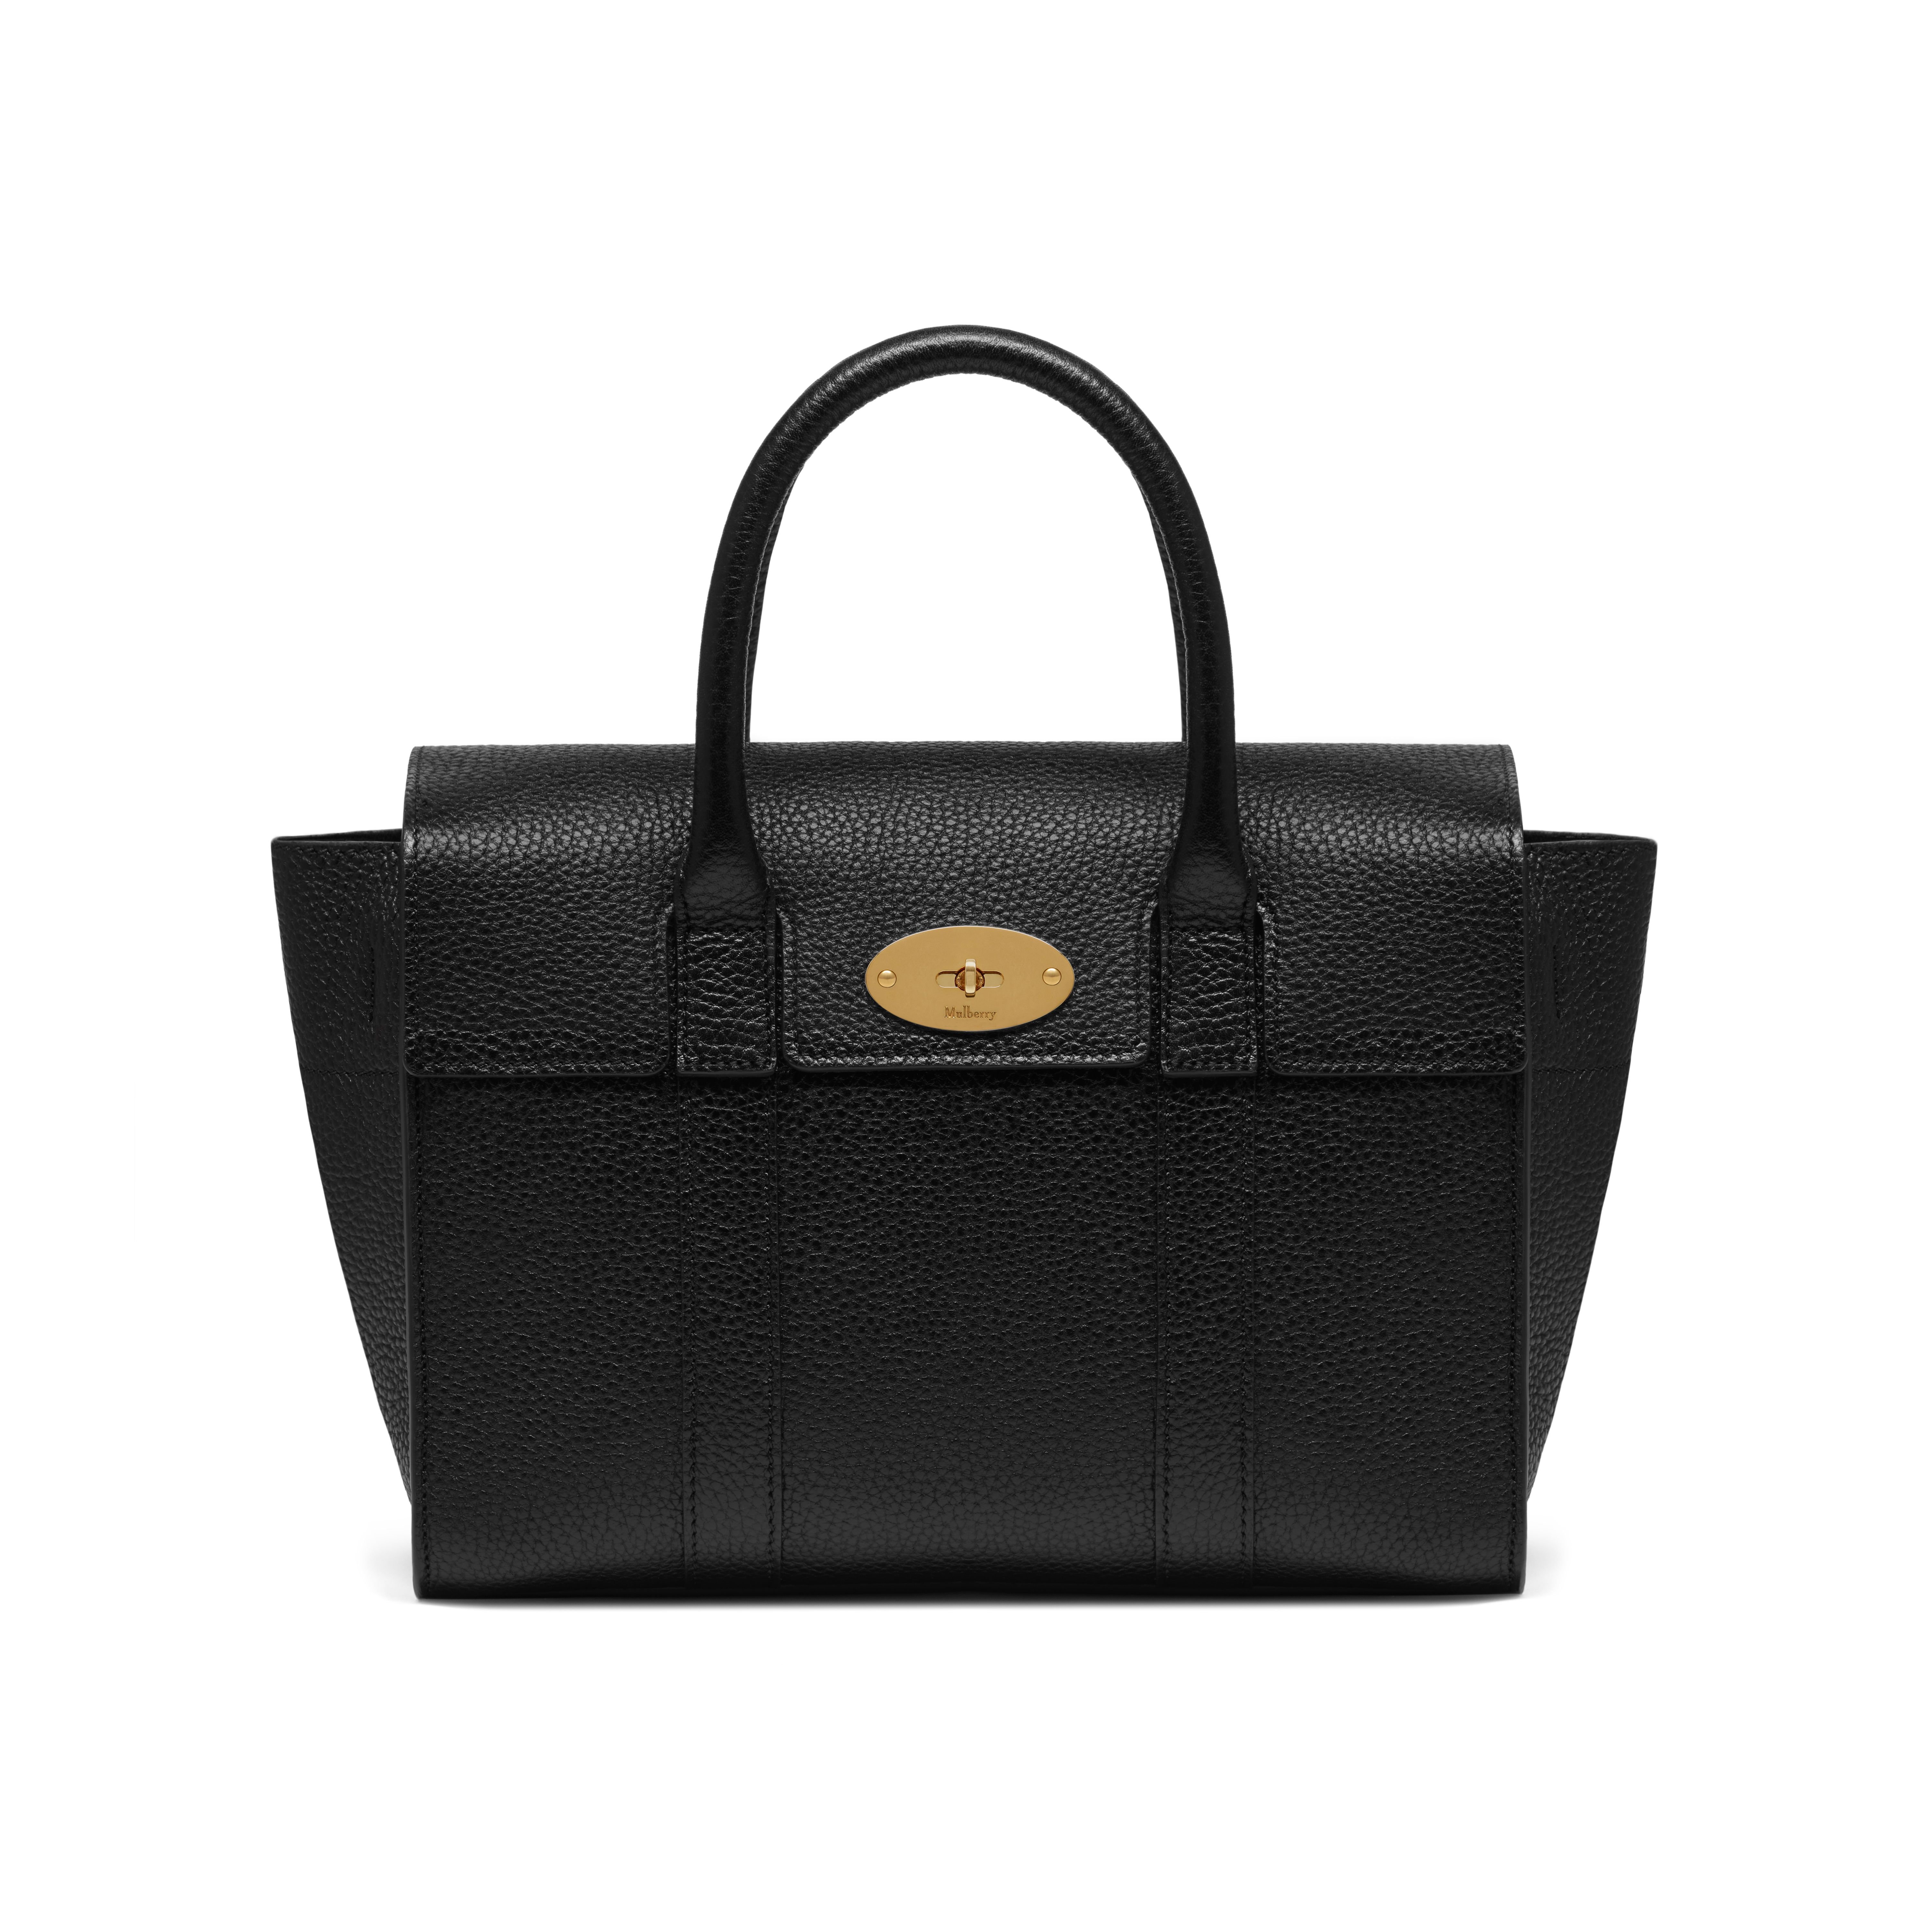 Mulberry Small New Bayswater Leather Bag in Black | Lyst